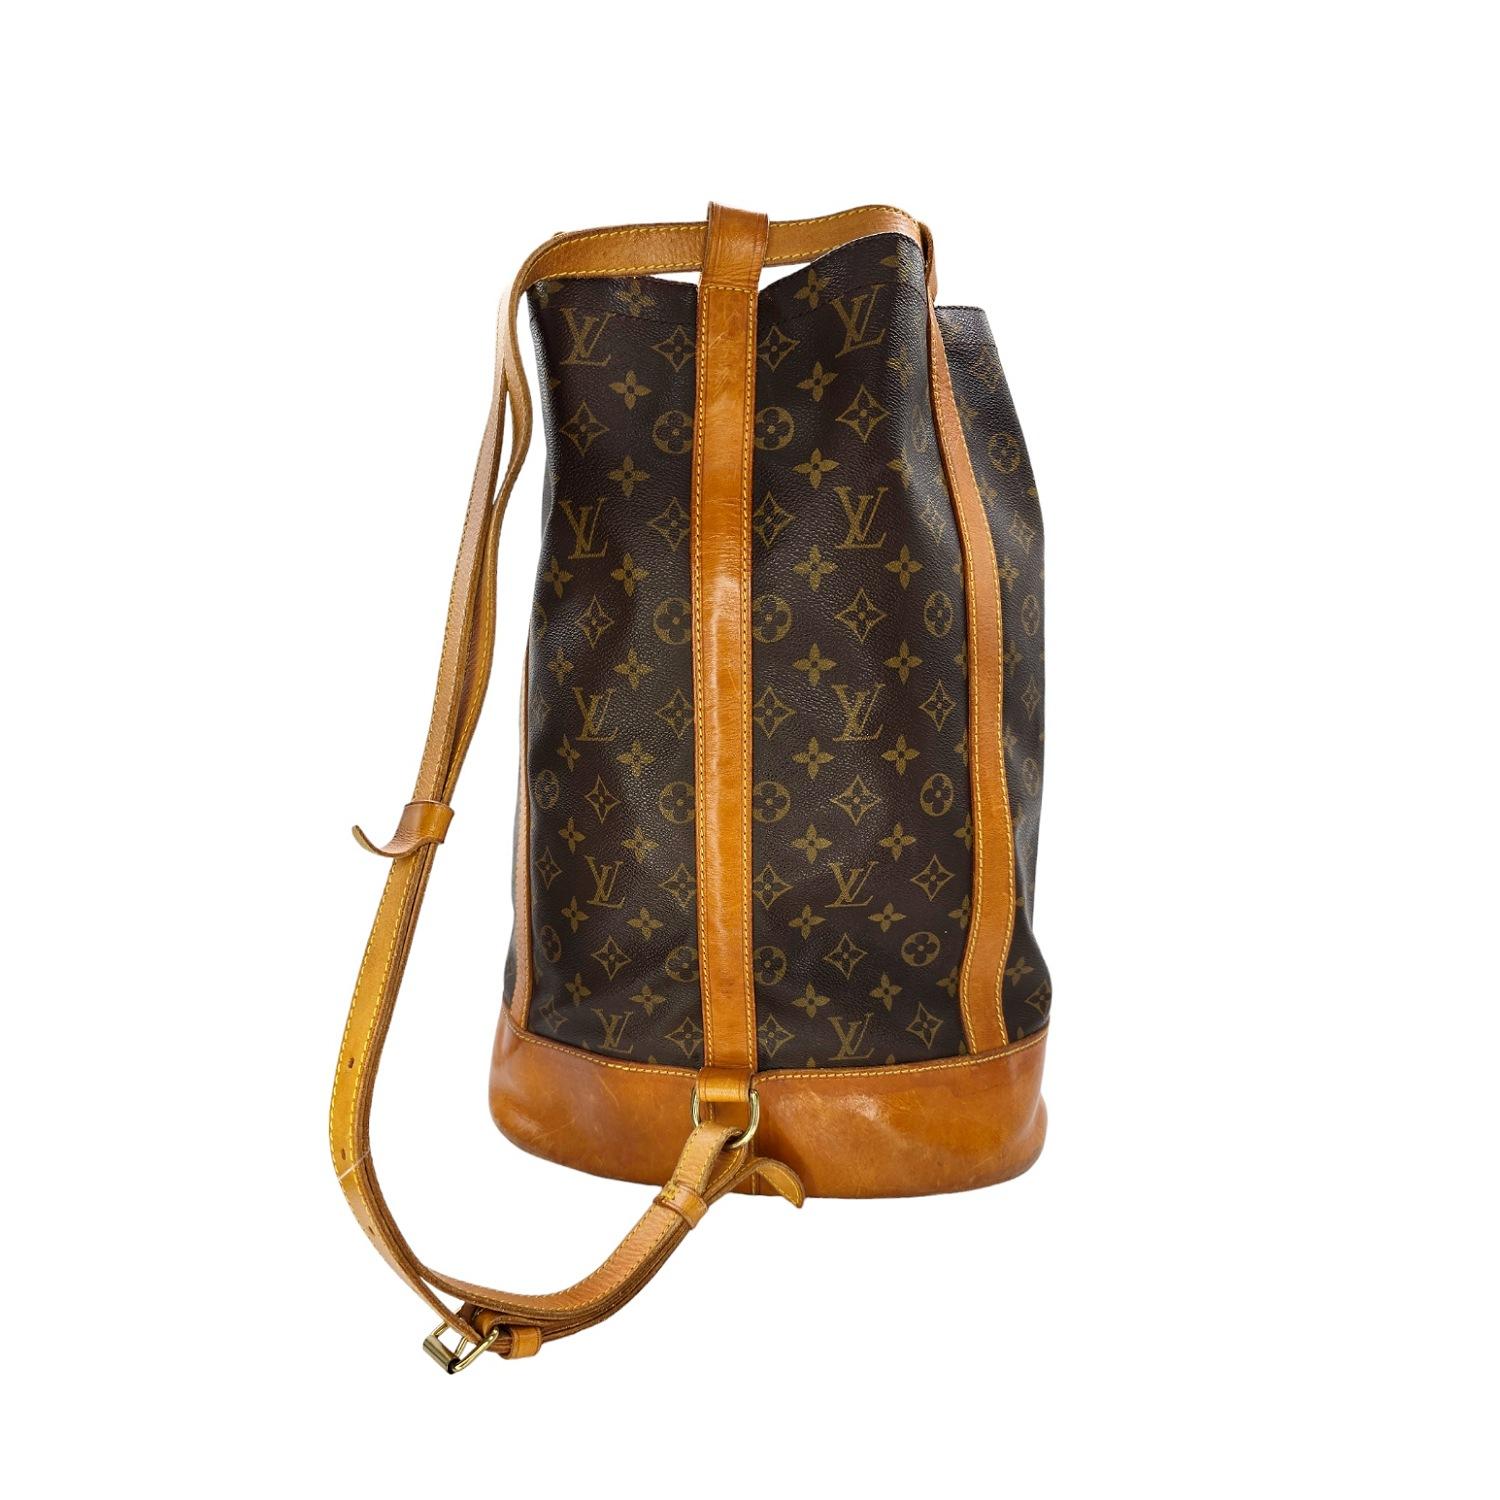 This Louis Vuitton Vintage Monogram Randonnee GM is a true statement piece. Made with exquisite detailing and Monogram canvas, its pure shape makes it an ideal city bag. Featuring a detachable interior pocket, this bucket bag is not only stylish but